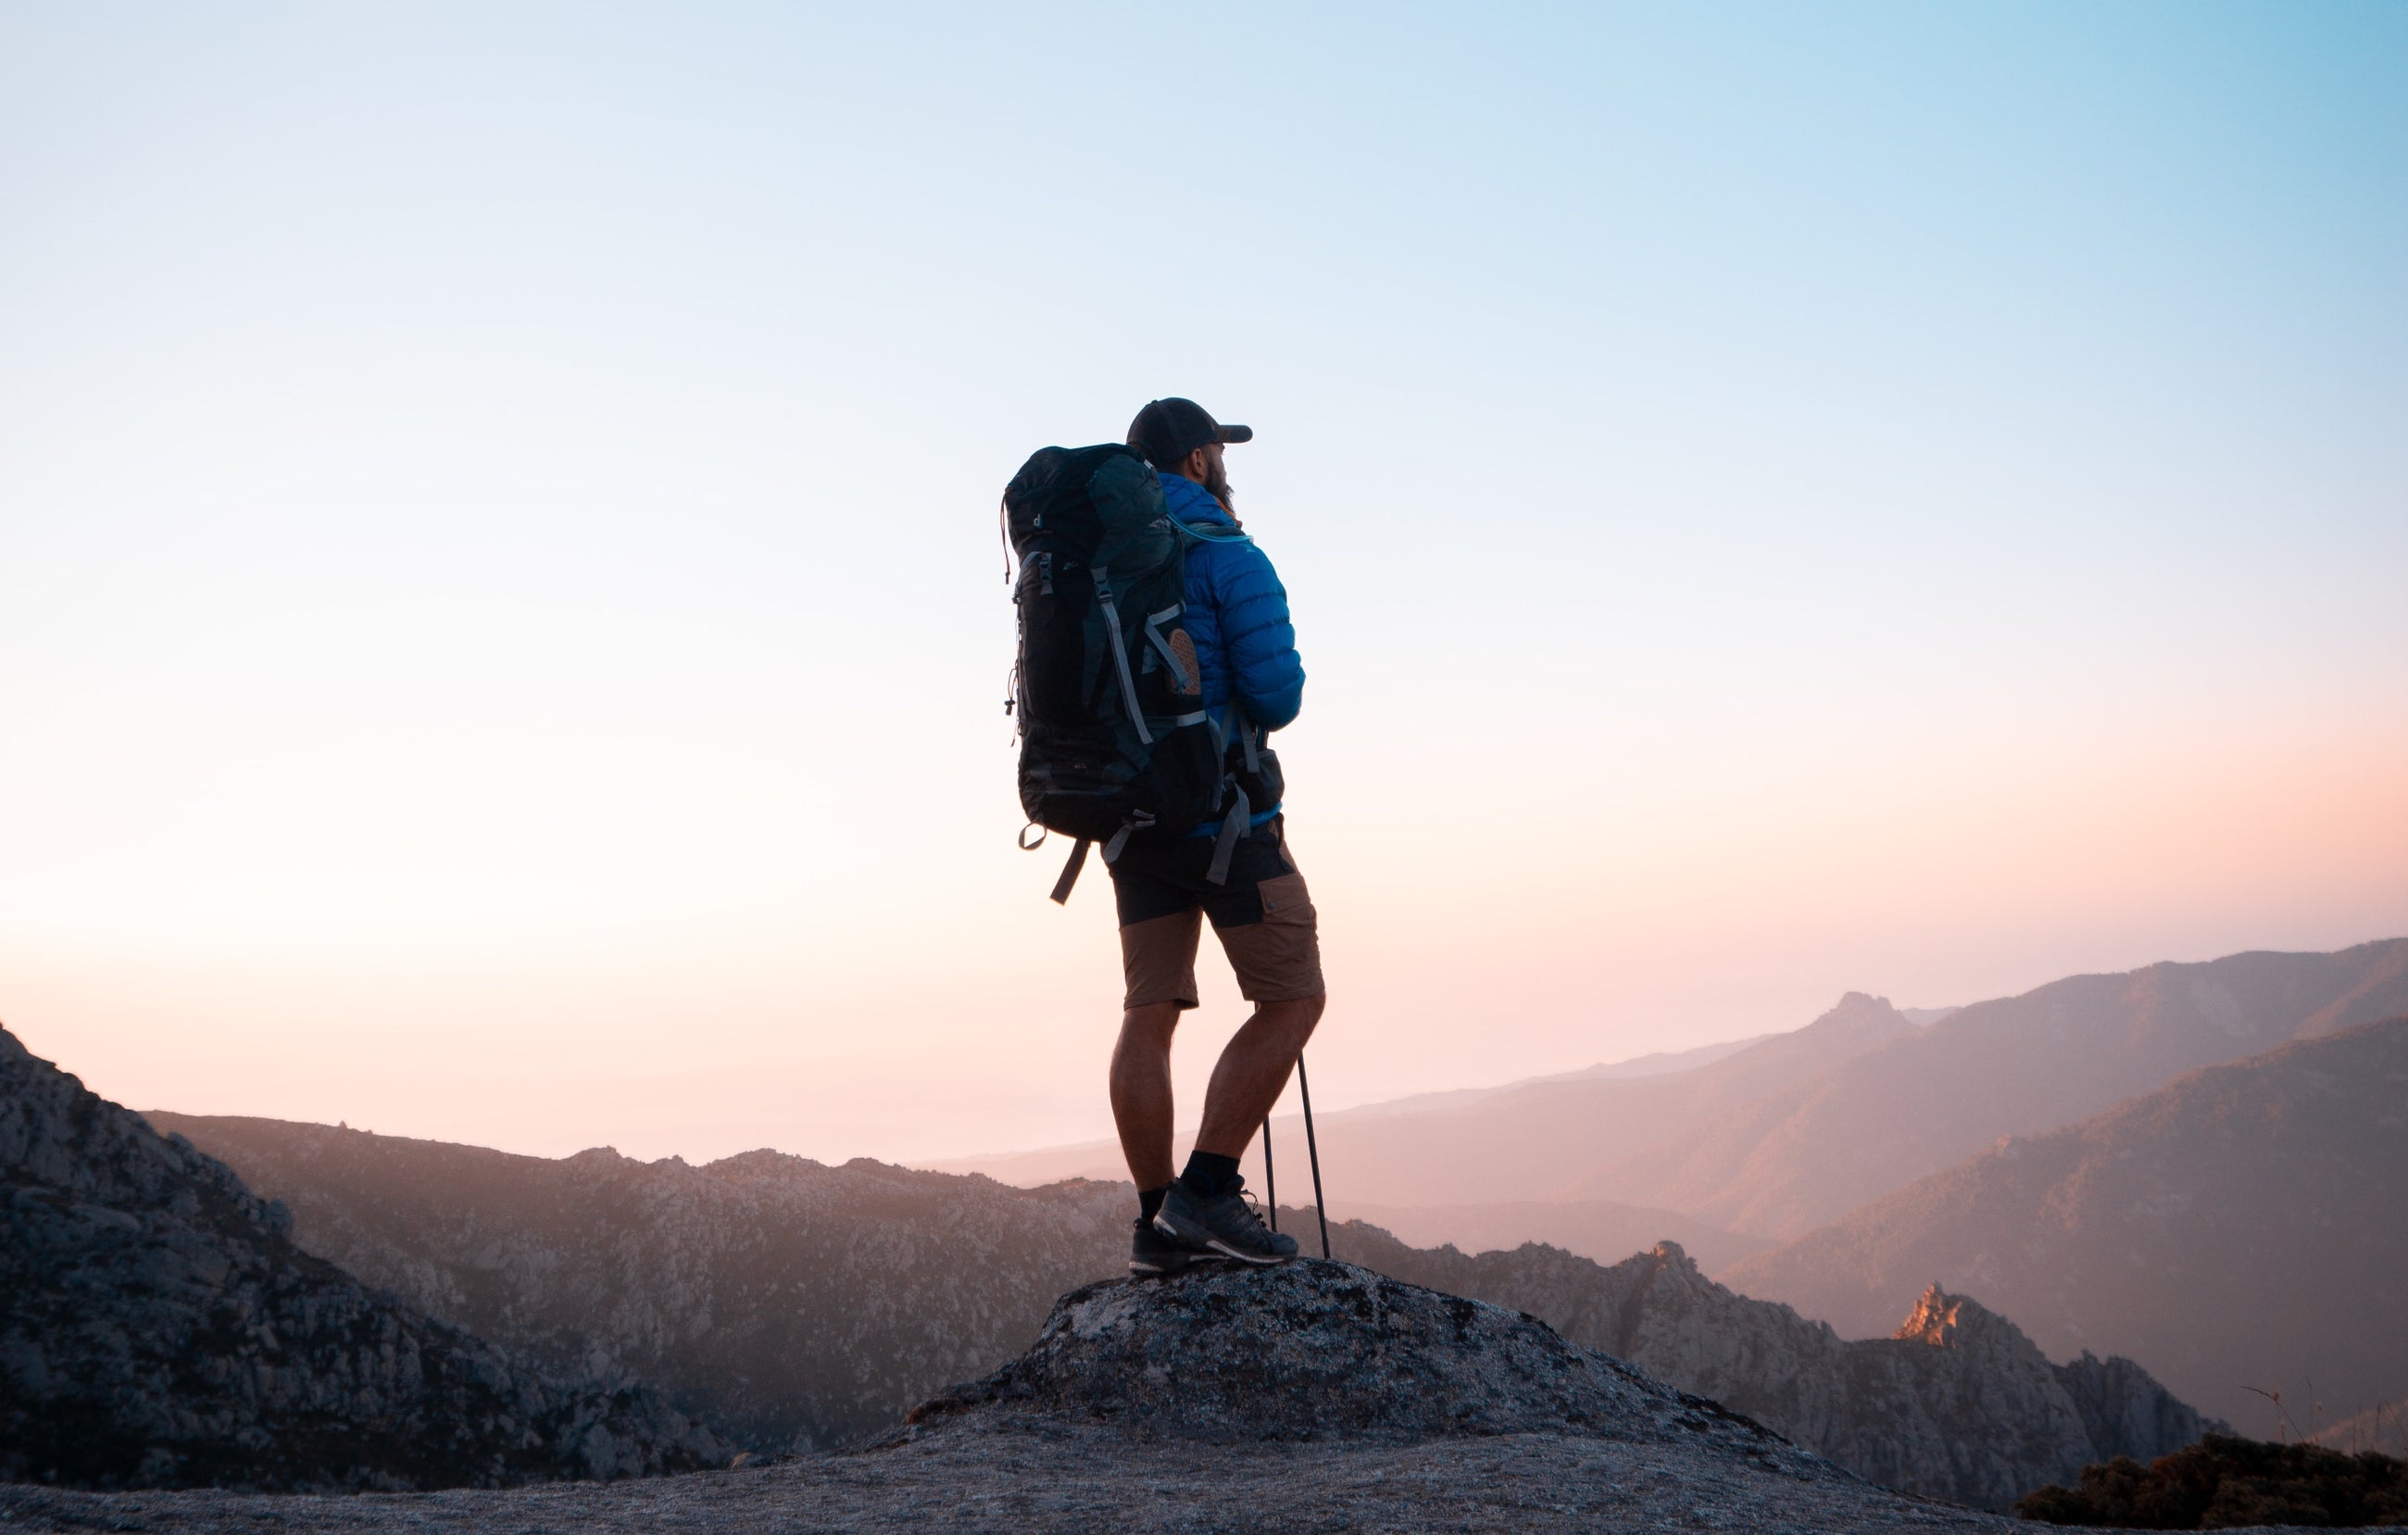 Man standing on peak with blue jacket, shorts, hiking poles and large hiking backpack